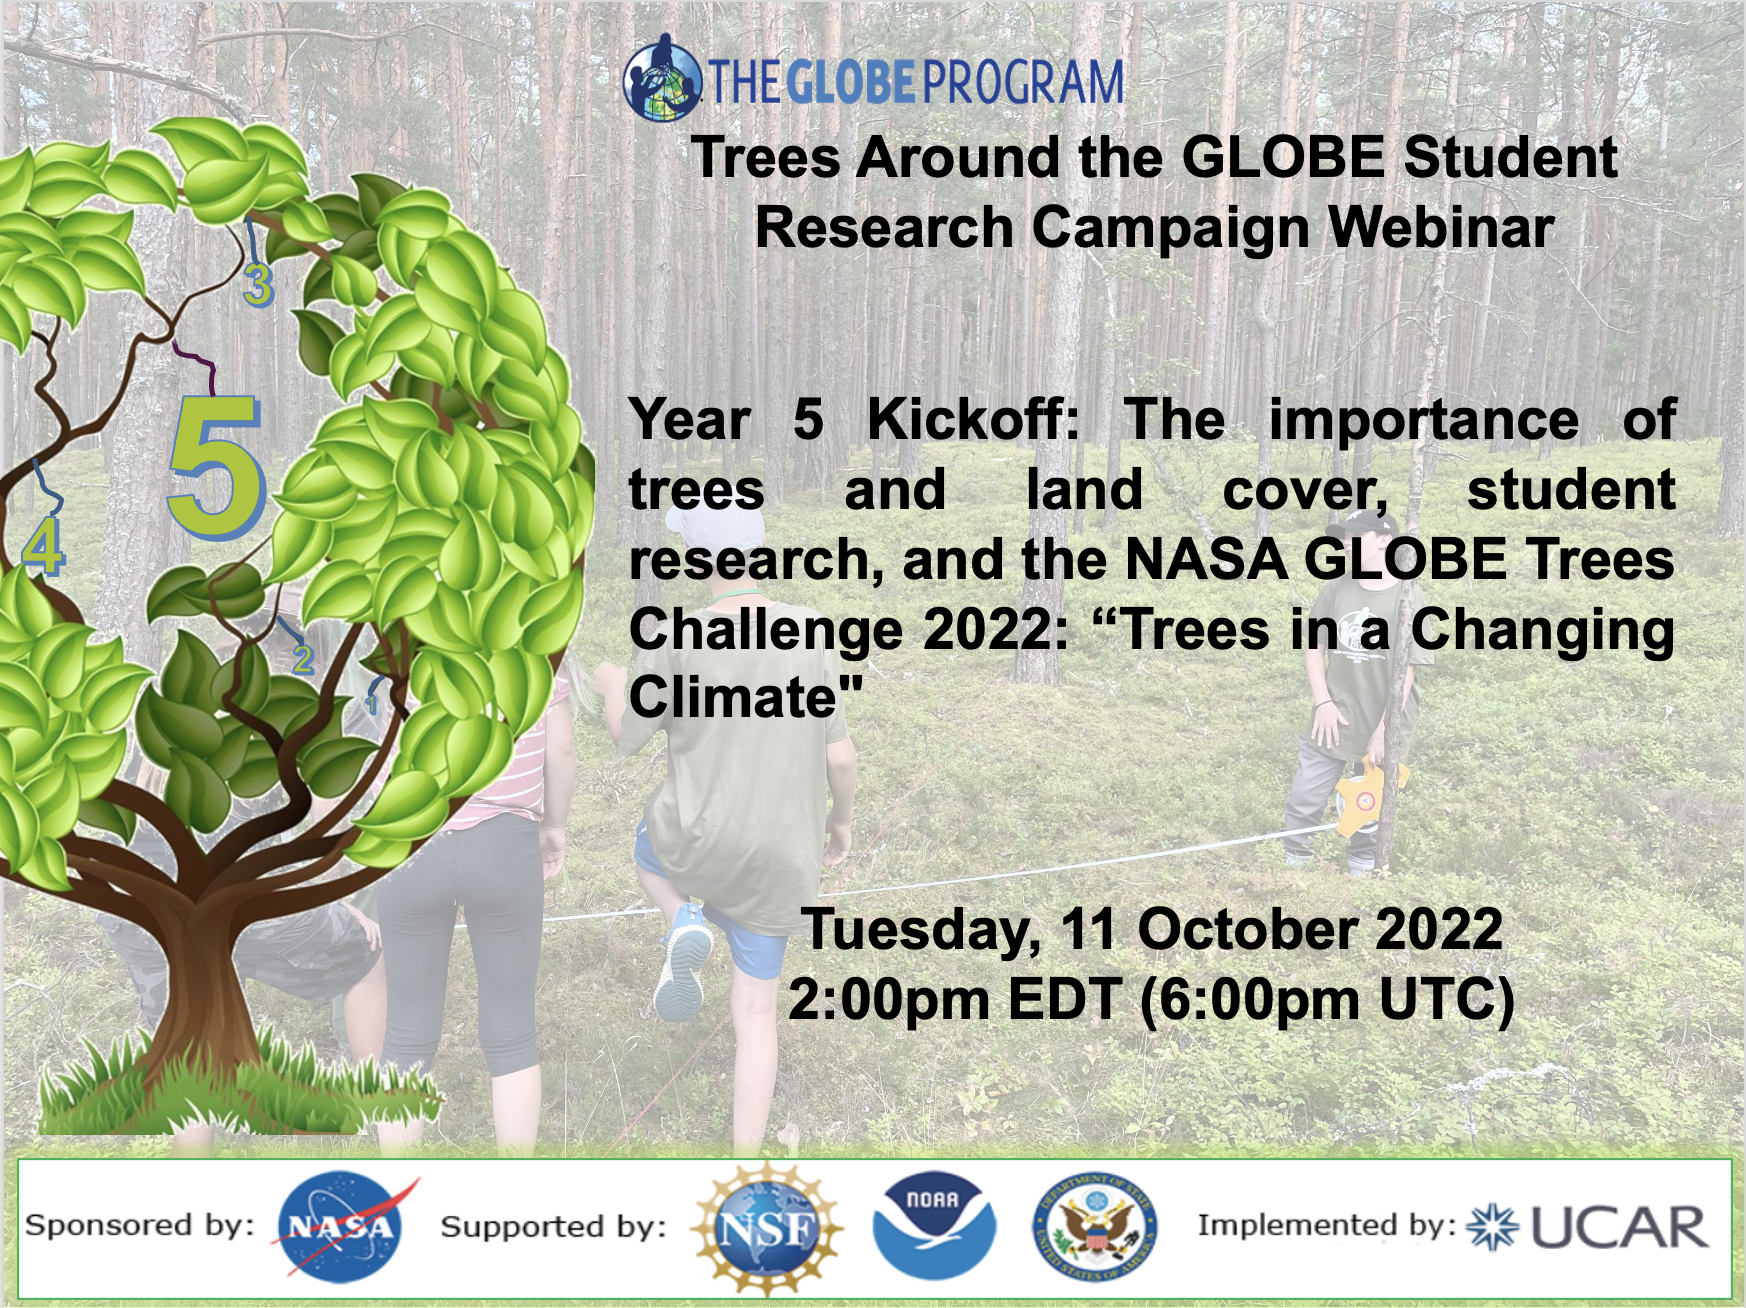 Trees Around the GLOBE 11 October webinar shareable, showing the title and date of the event